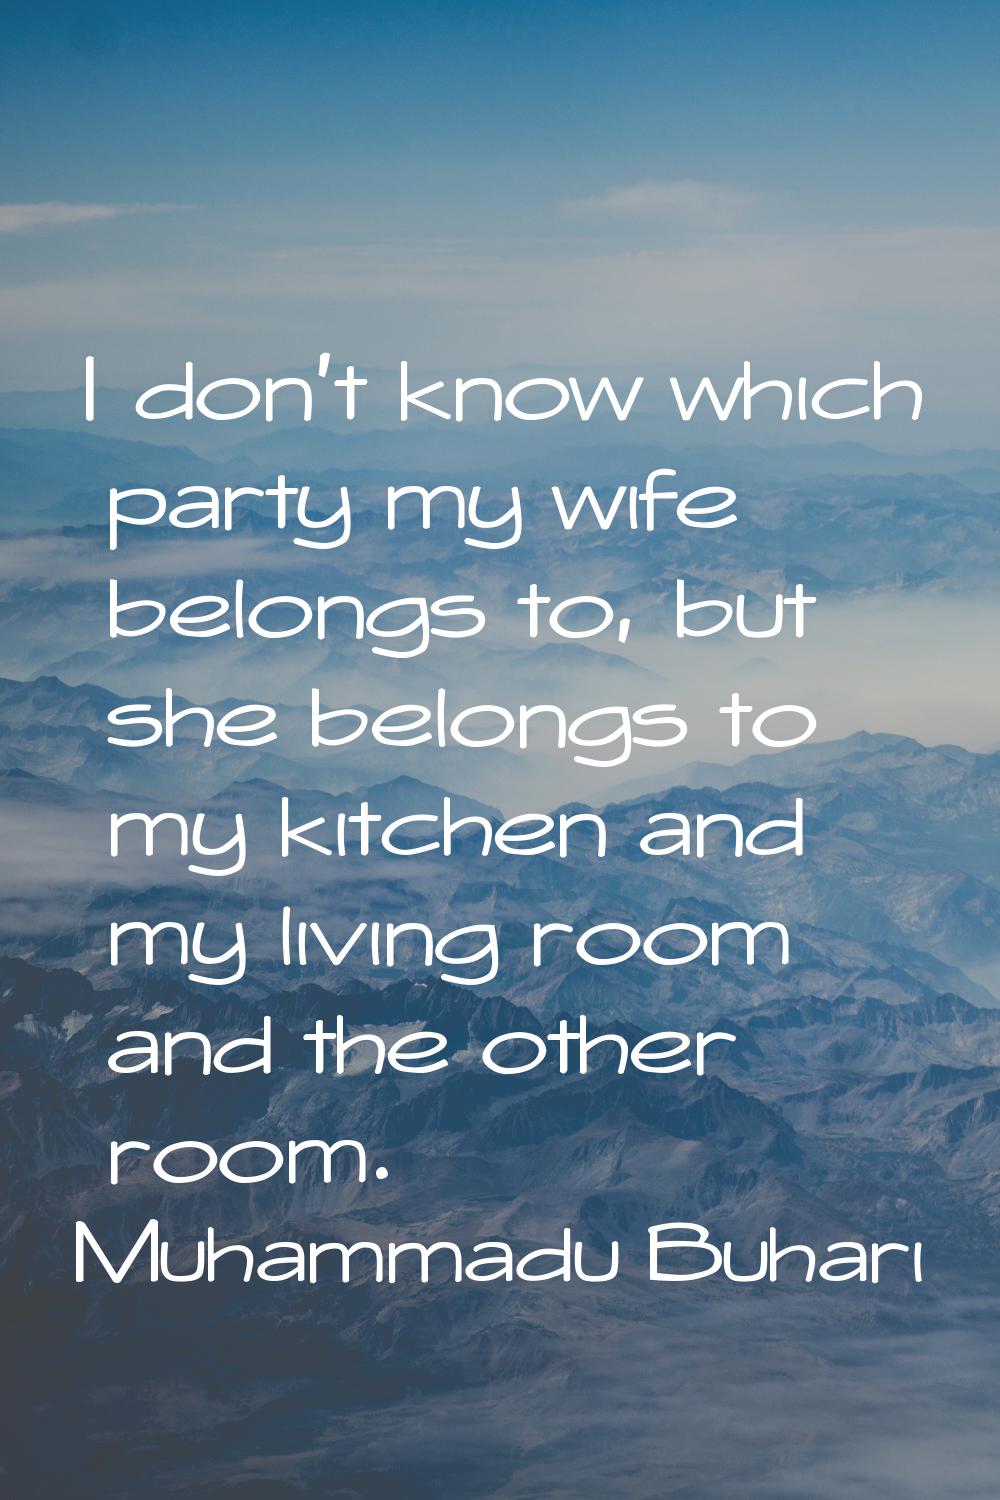 I don't know which party my wife belongs to, but she belongs to my kitchen and my living room and t